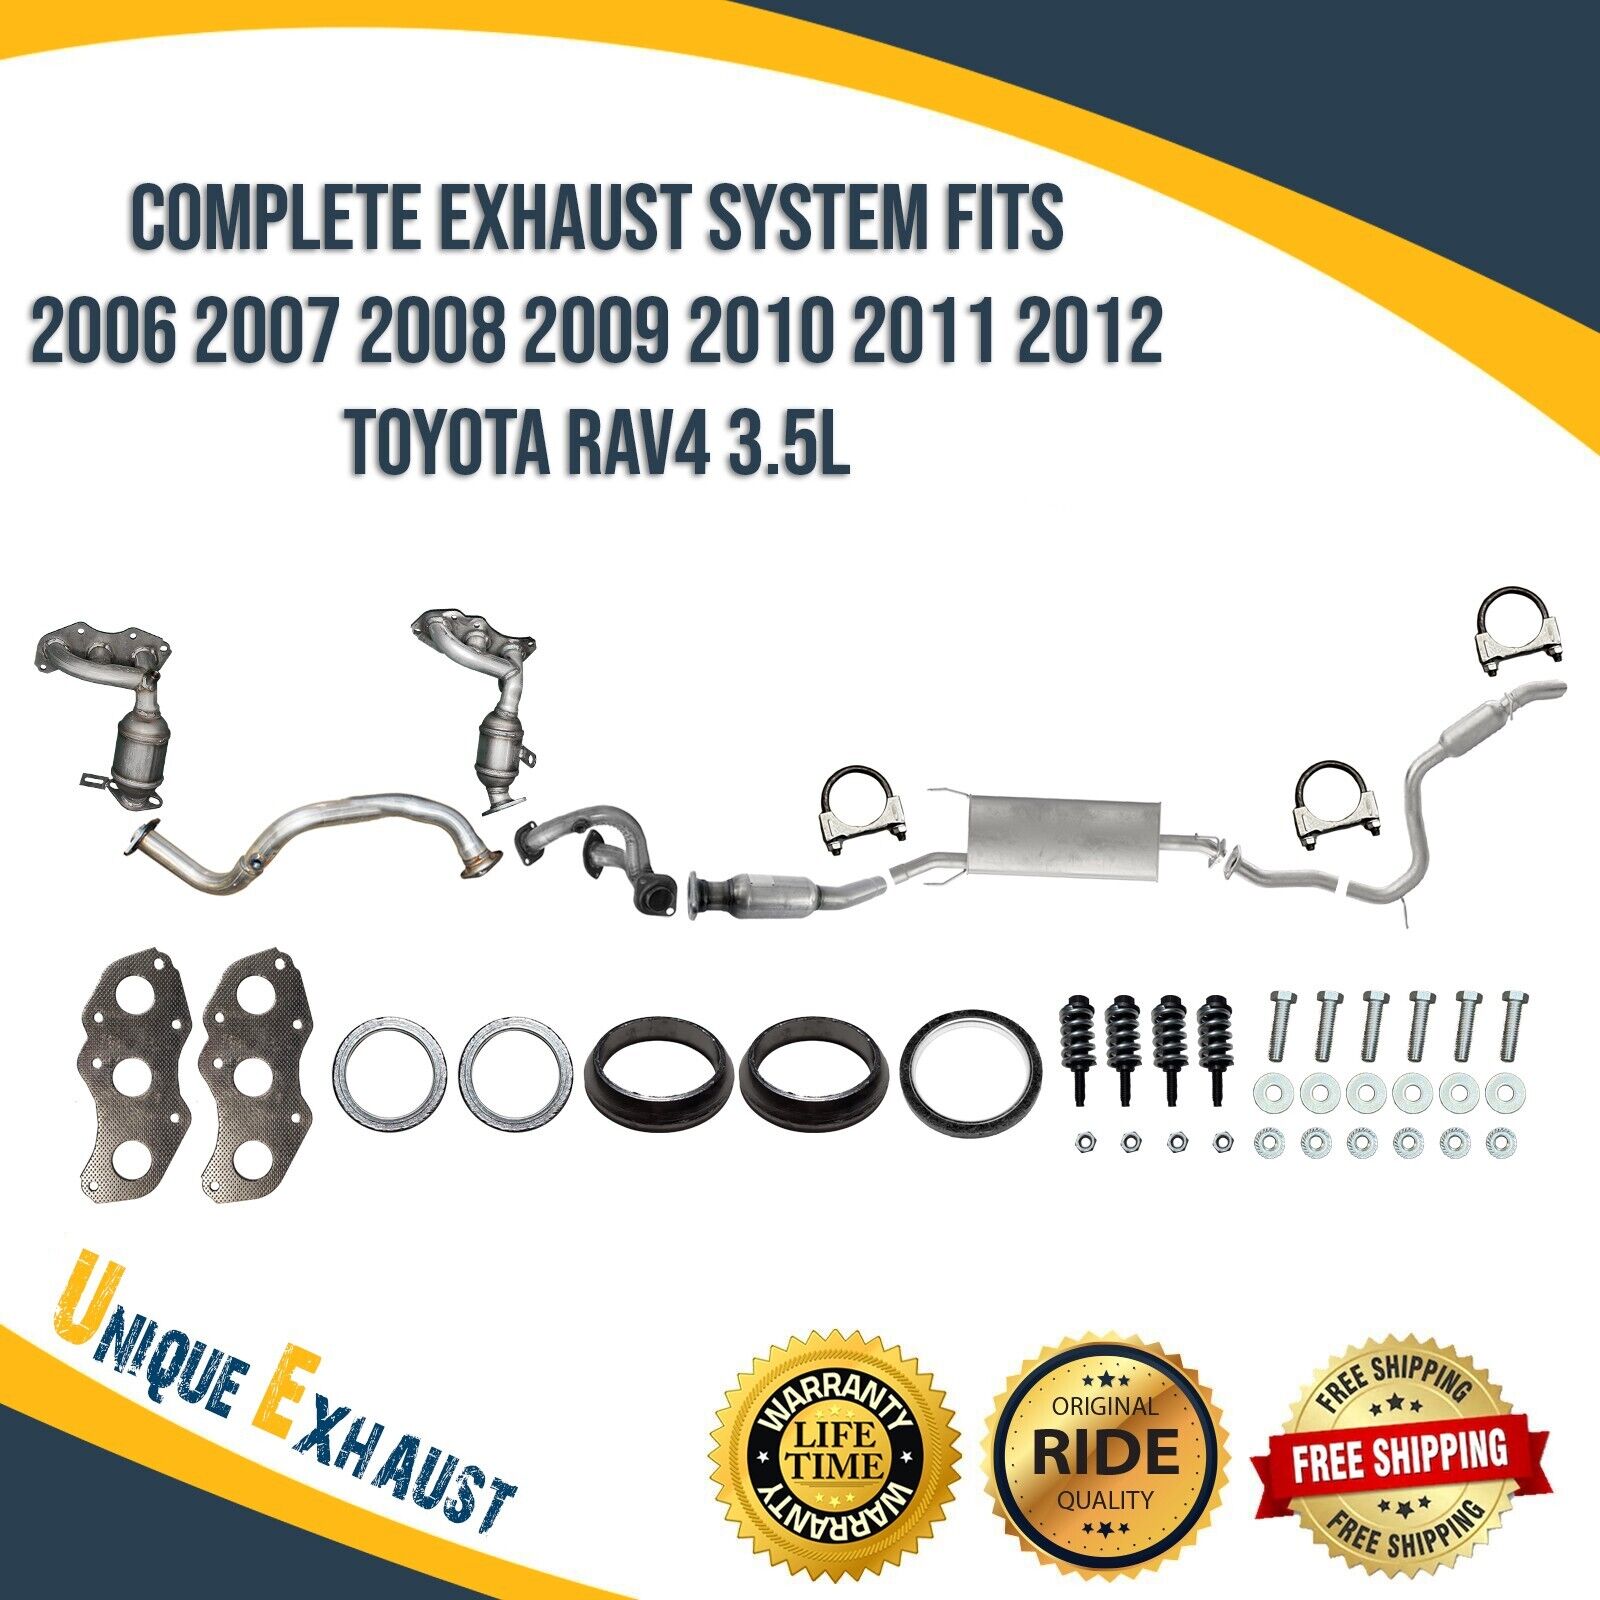 Complete Exhaust System Fits 2006 2007 2008 2009 2010 2011 2012 Toyota RAV4 3.5L